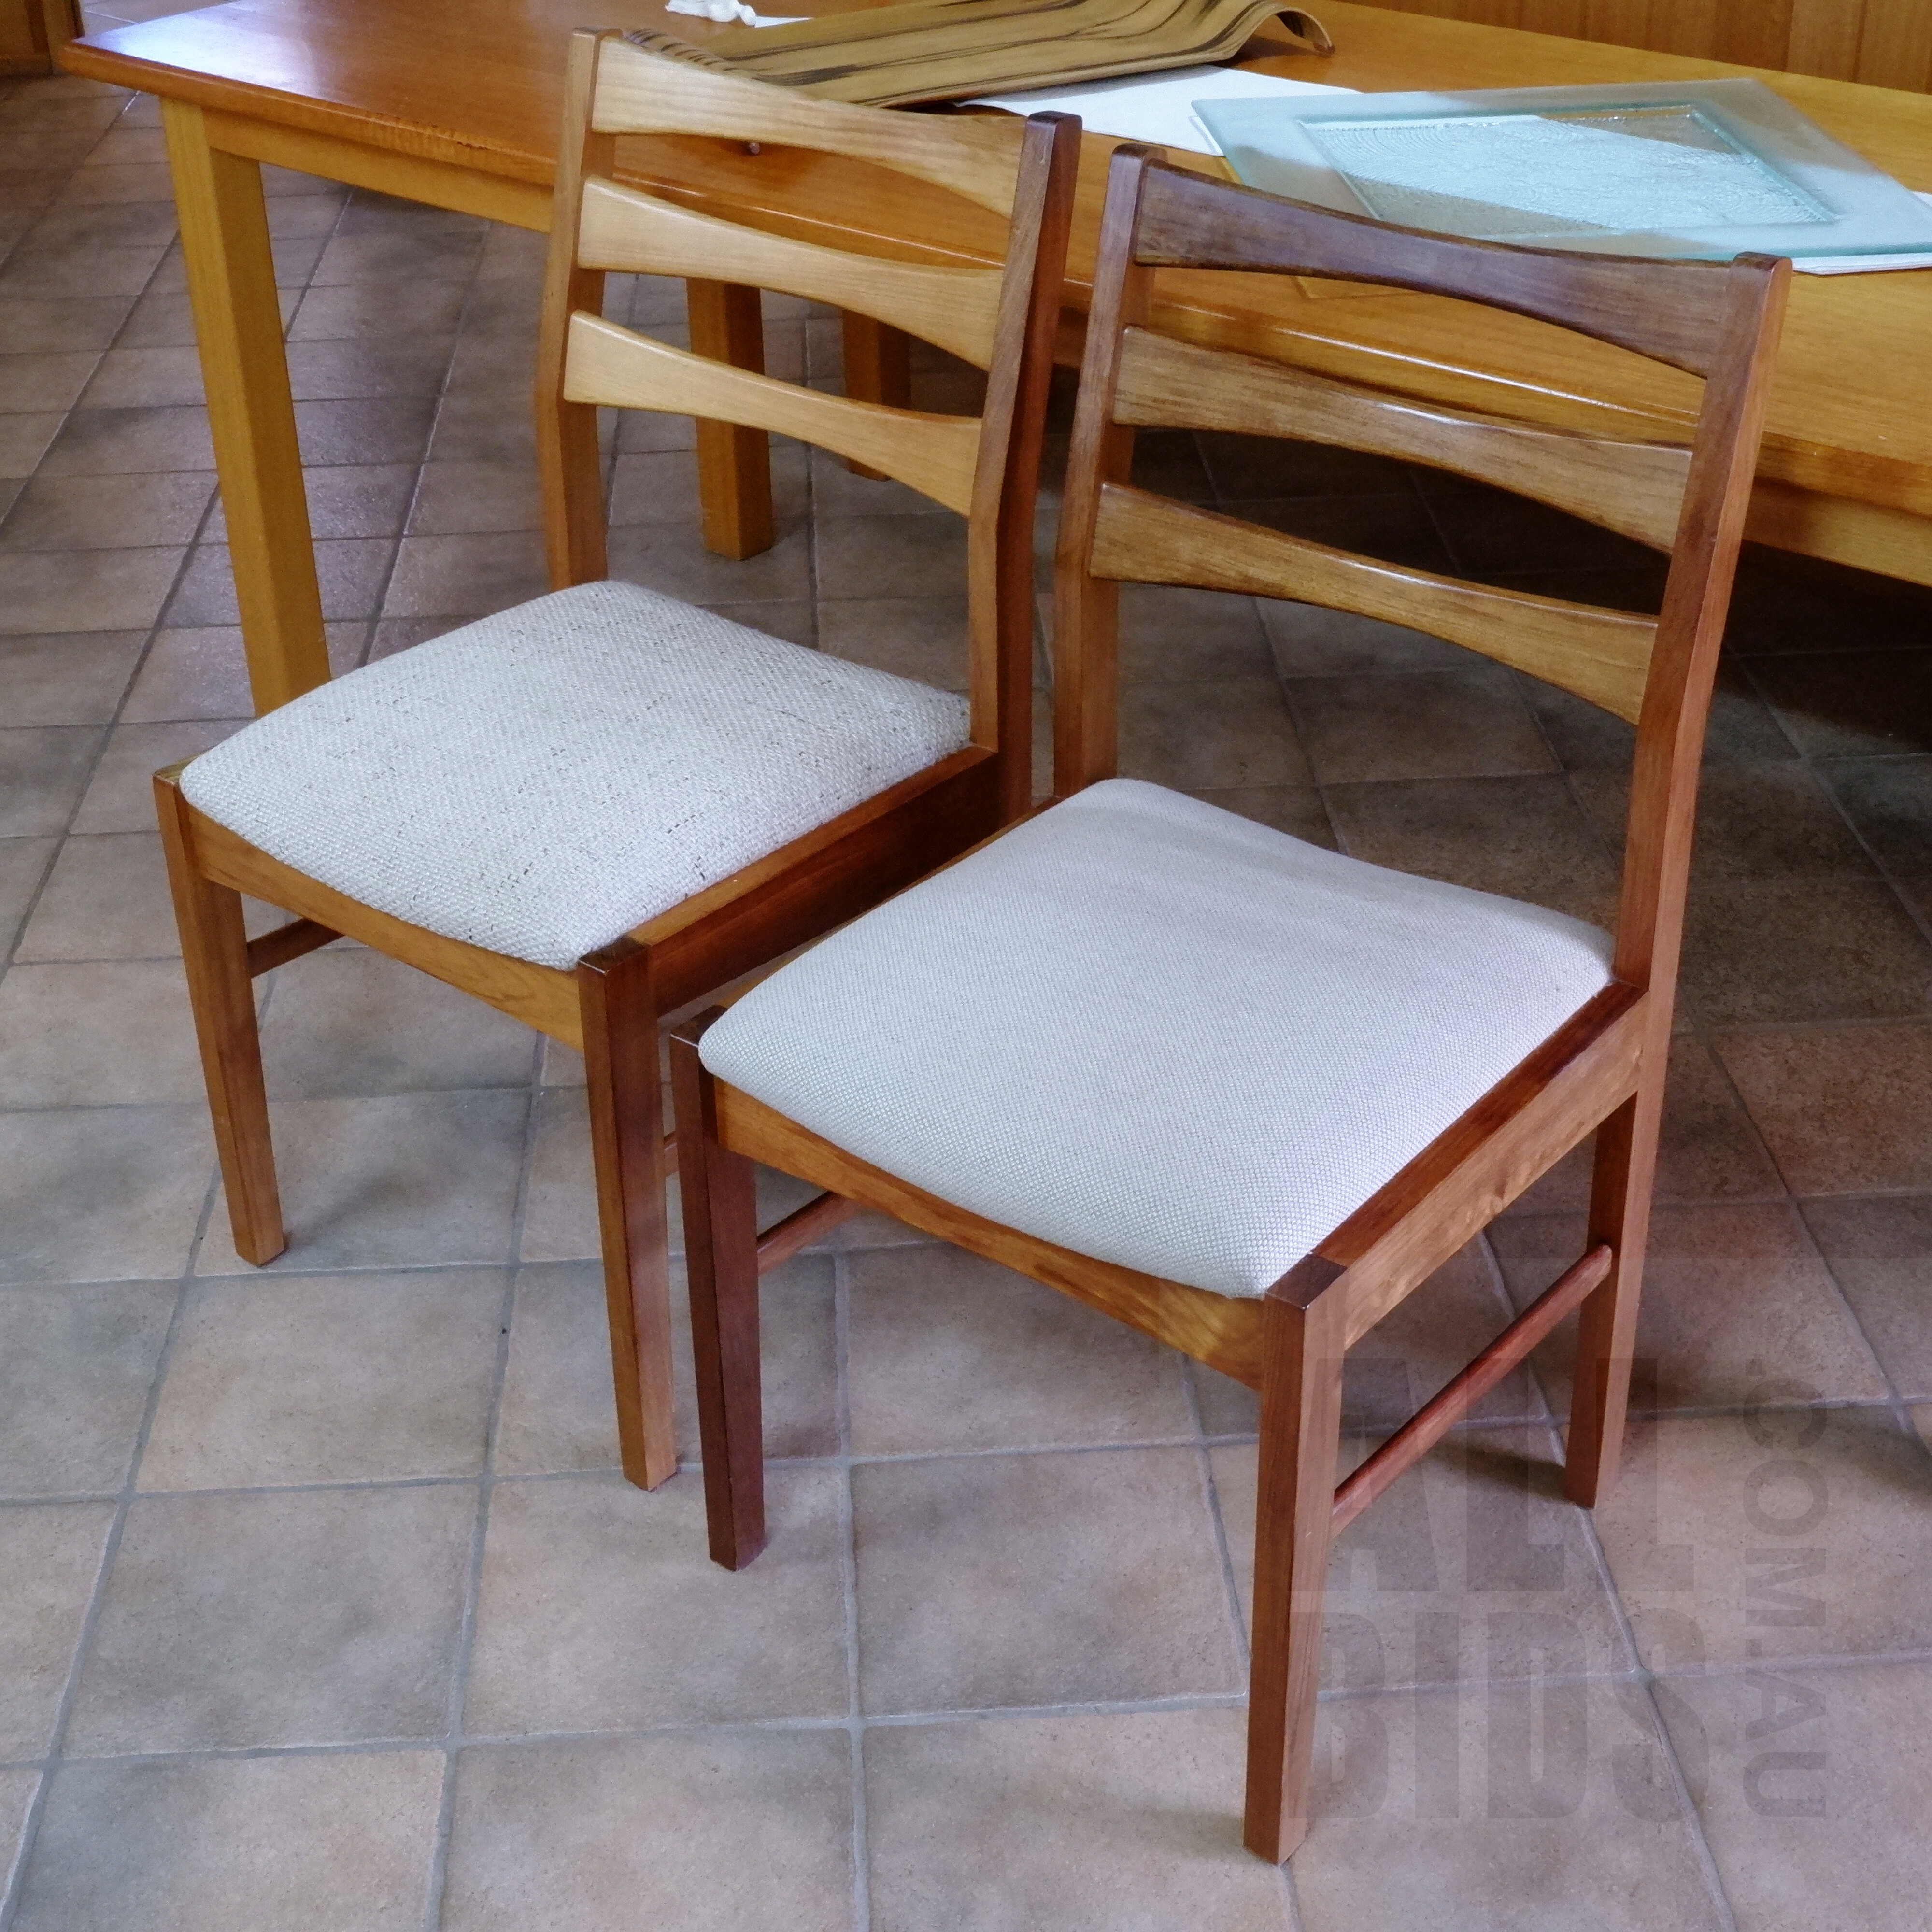 'Pair of Tasmanian Blackwood Dining Chairs Made by Pipers Truline'